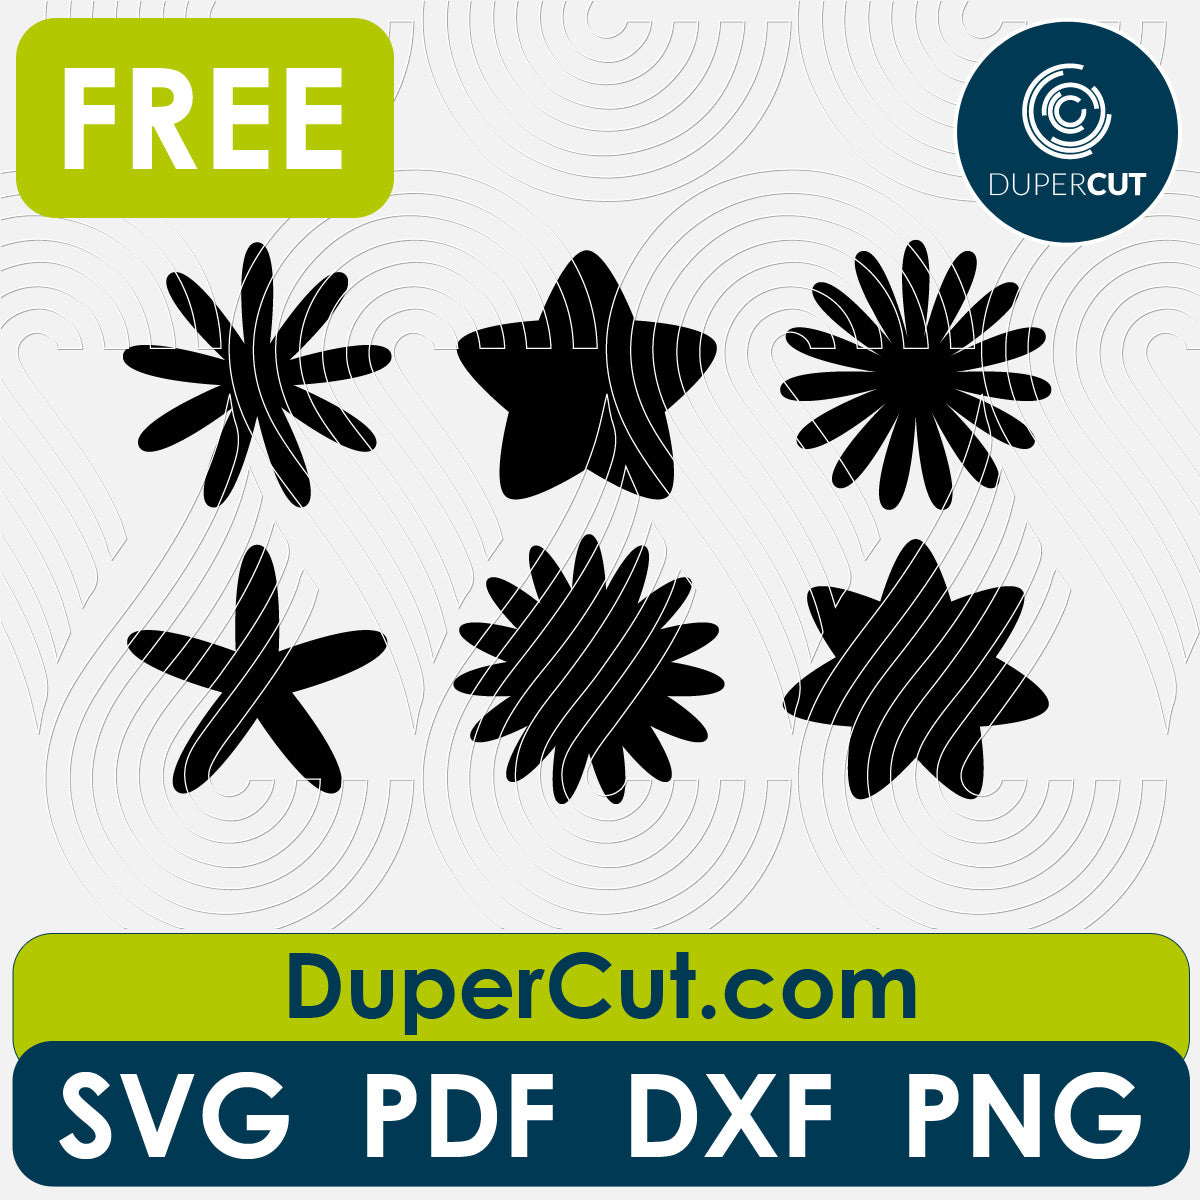 Simple flower shapes free cutting template SVG PNG DXF files for Glowforge, Cricut, Silhouette, CNC laser router by DuperCut.com